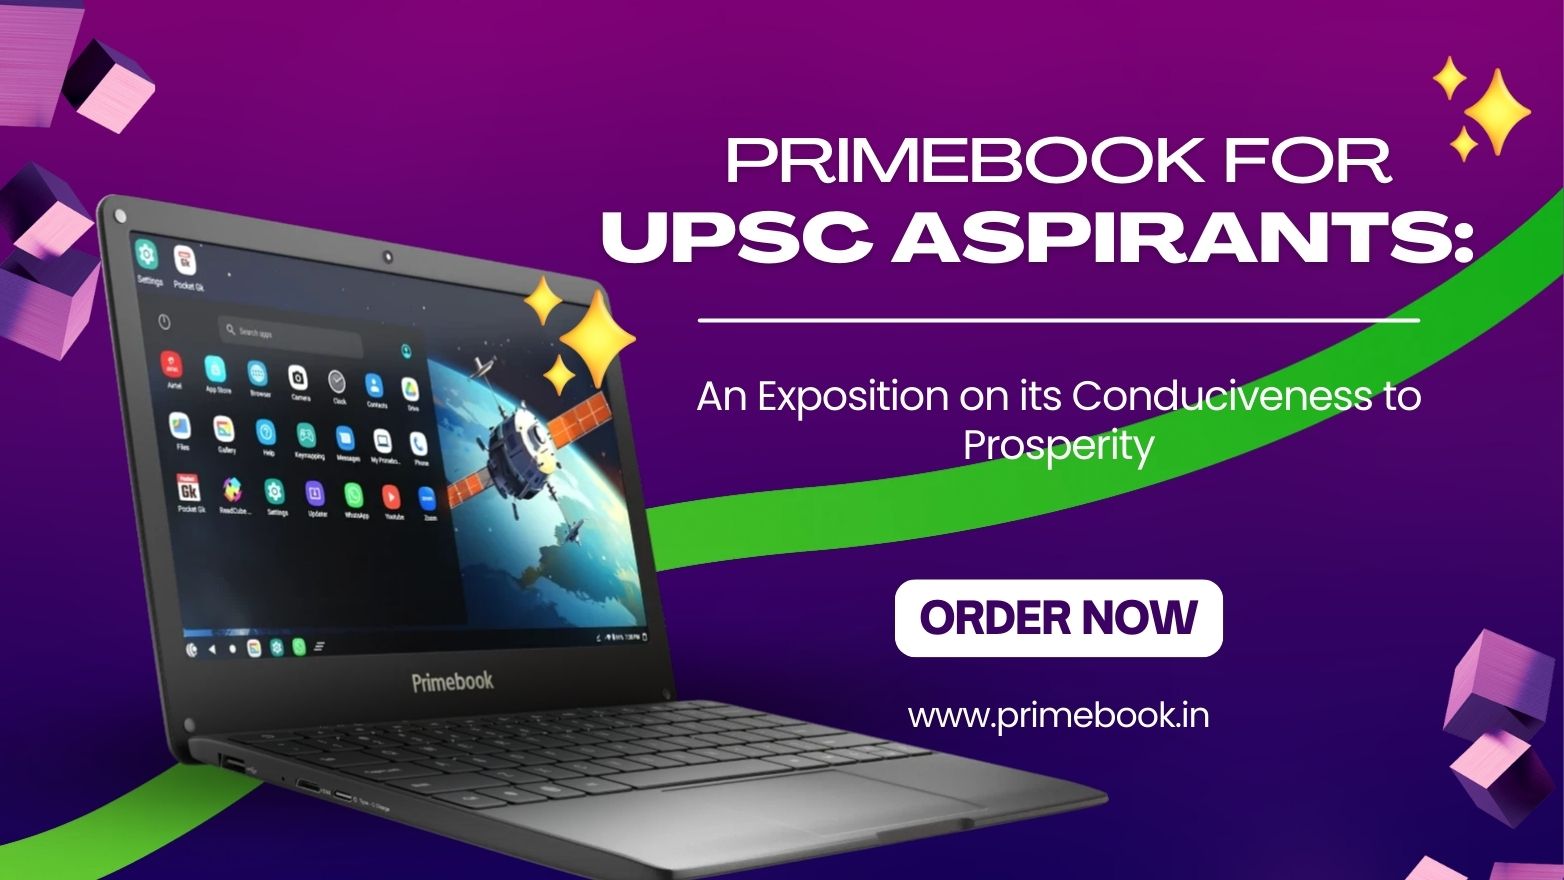 Primebook for UPSC Aspirants: An Exposition on its Conduciveness to Prosperity